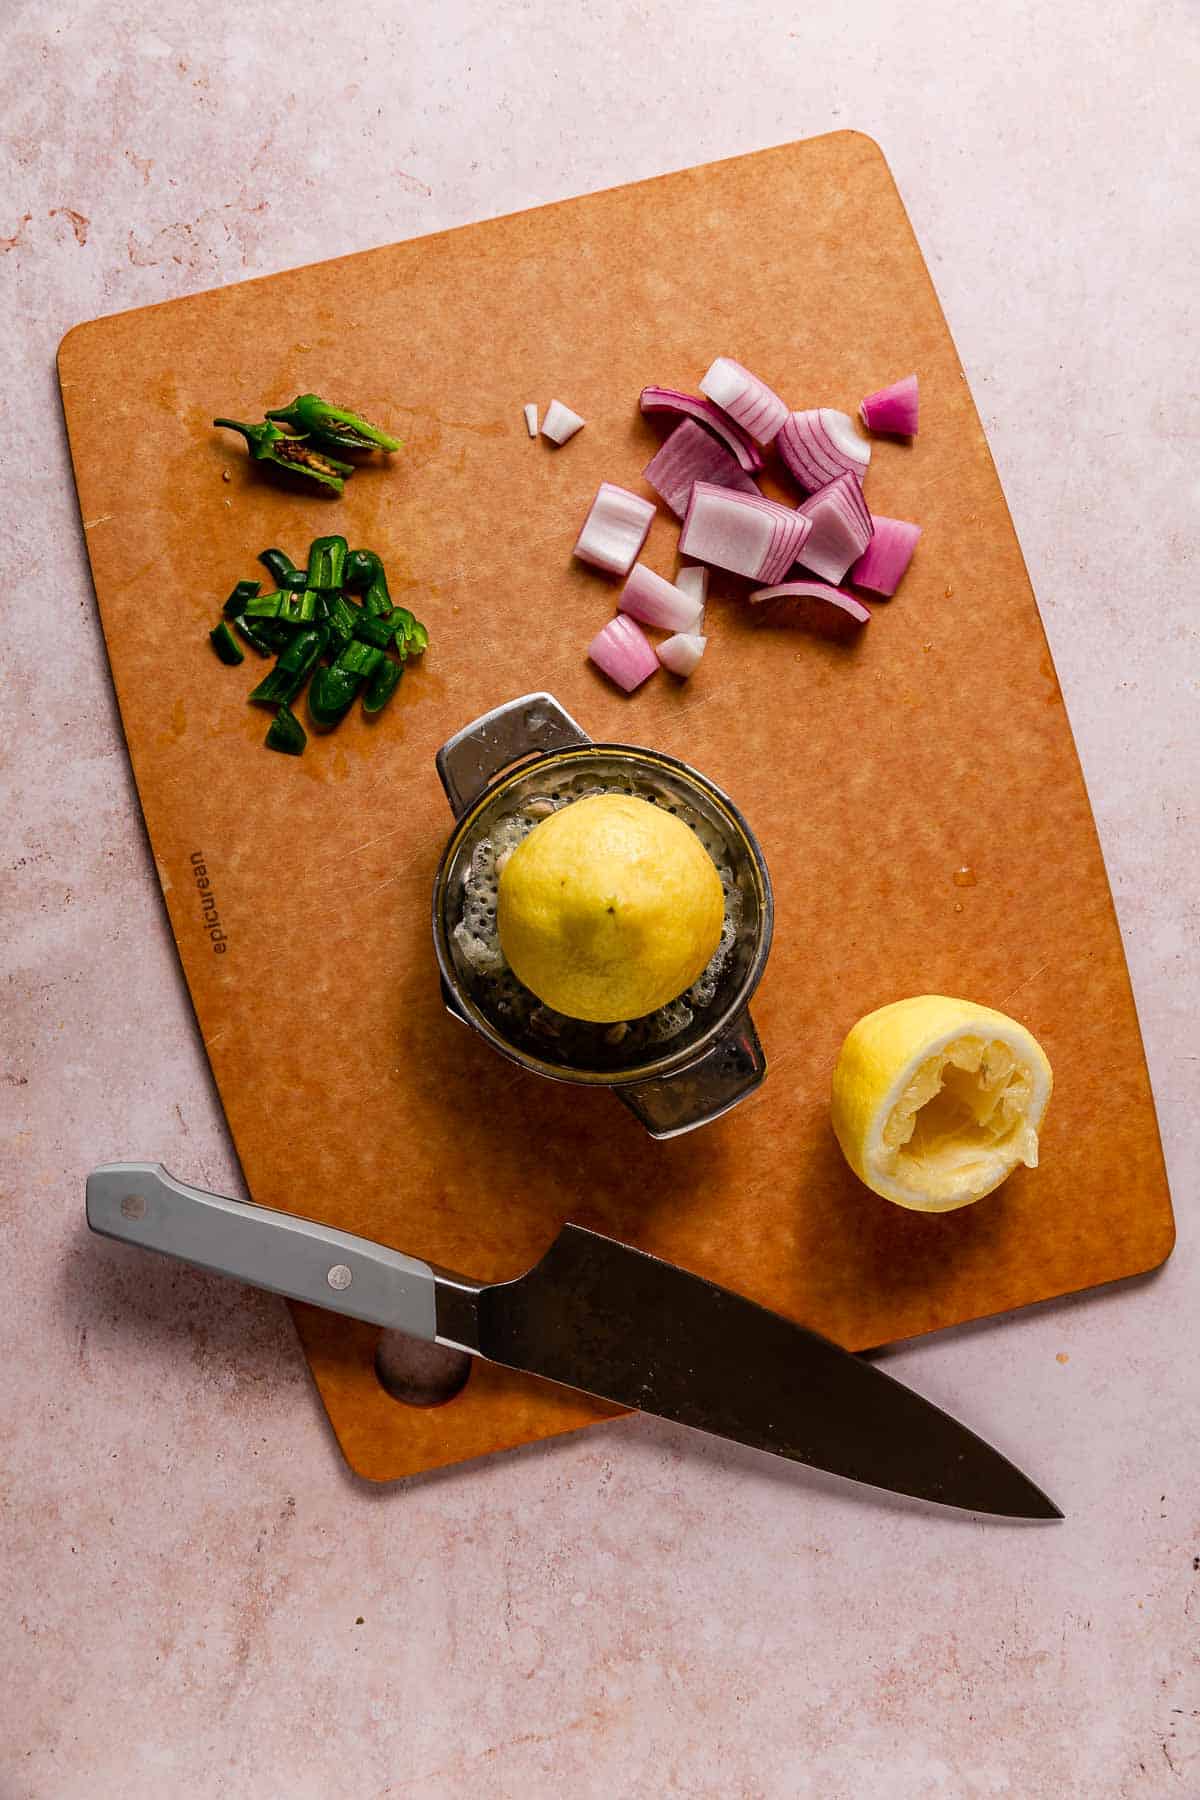 A lemon being juiced next to chopped jalapeno and red onion on a cutting board.